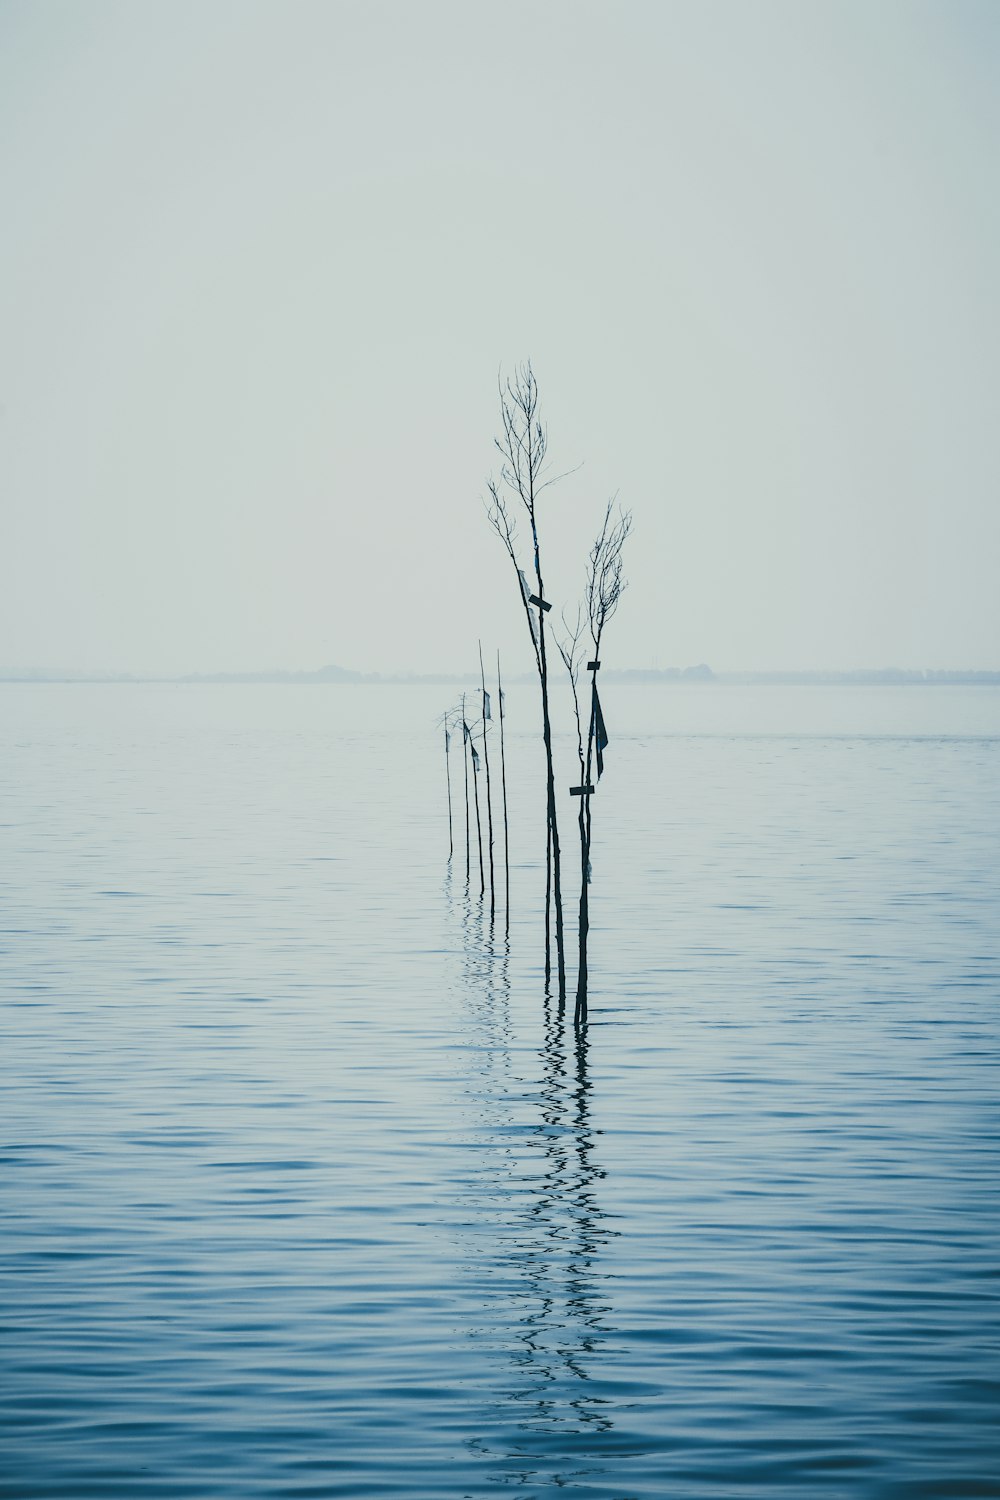 a group of trees in the middle of a body of water